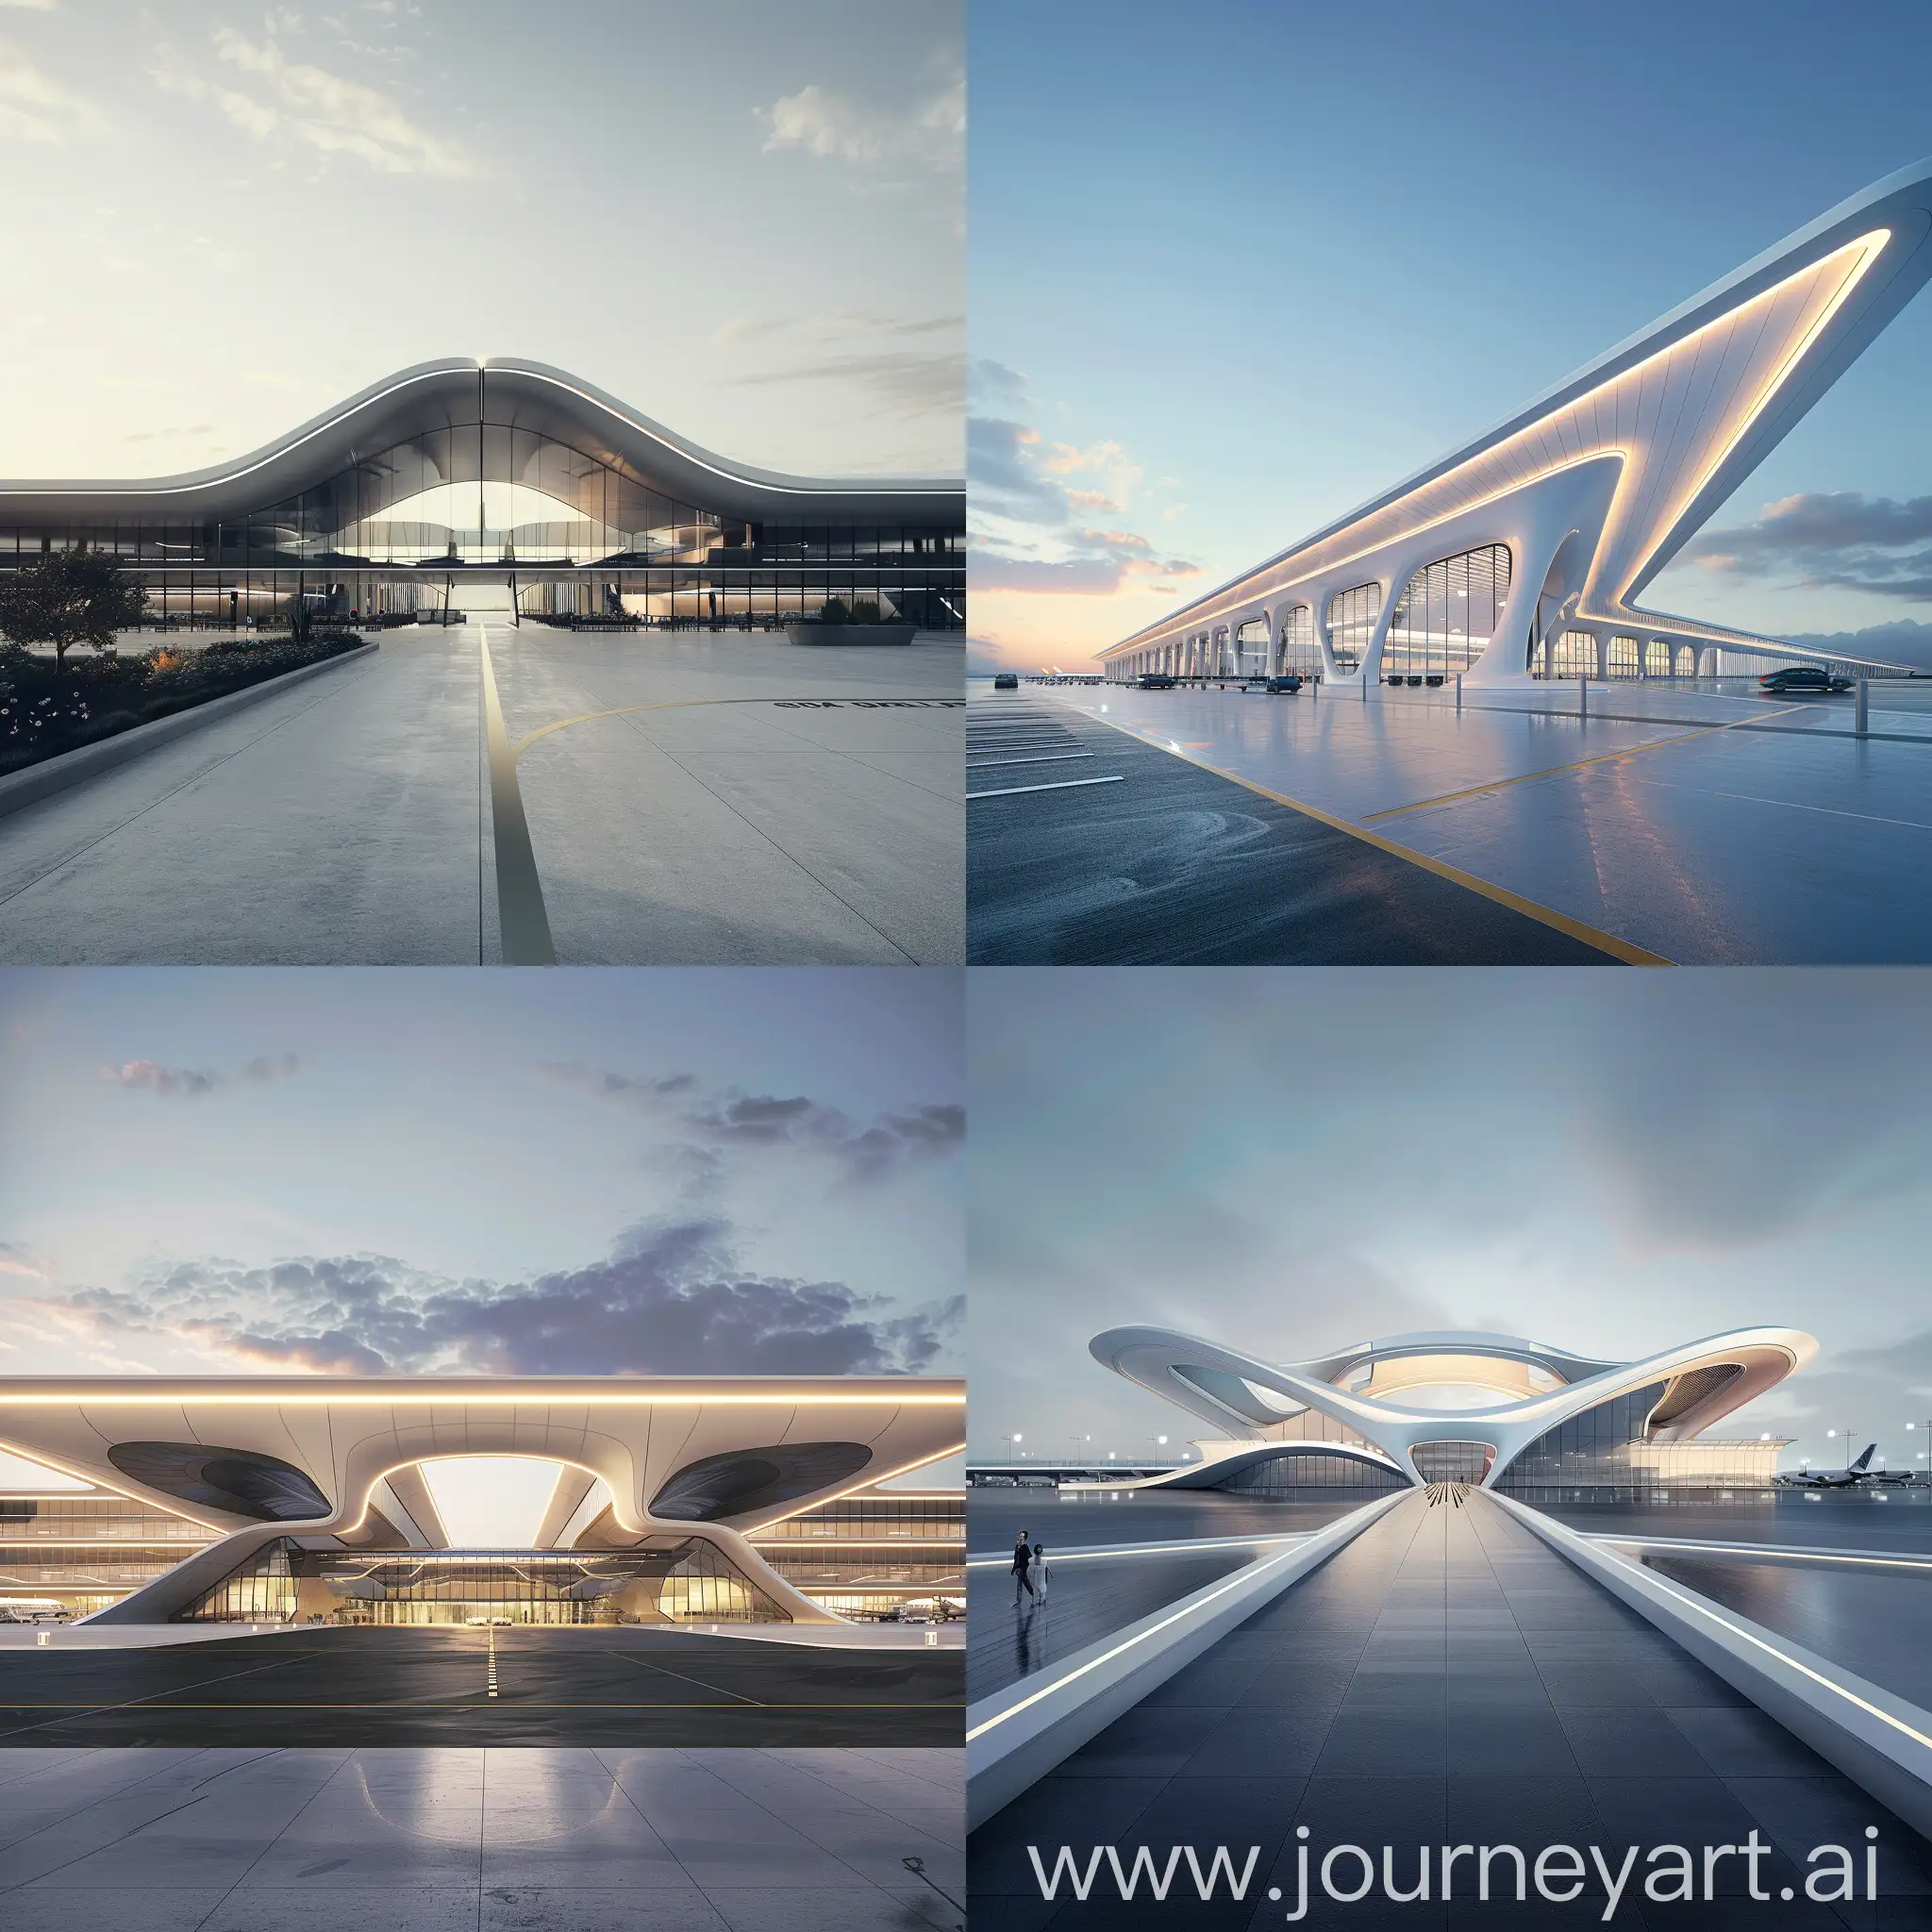 A front view of linear airport terminal that blends seamlessly into its surroundings, with parametric design elements that create a sense of fluidity and movement.